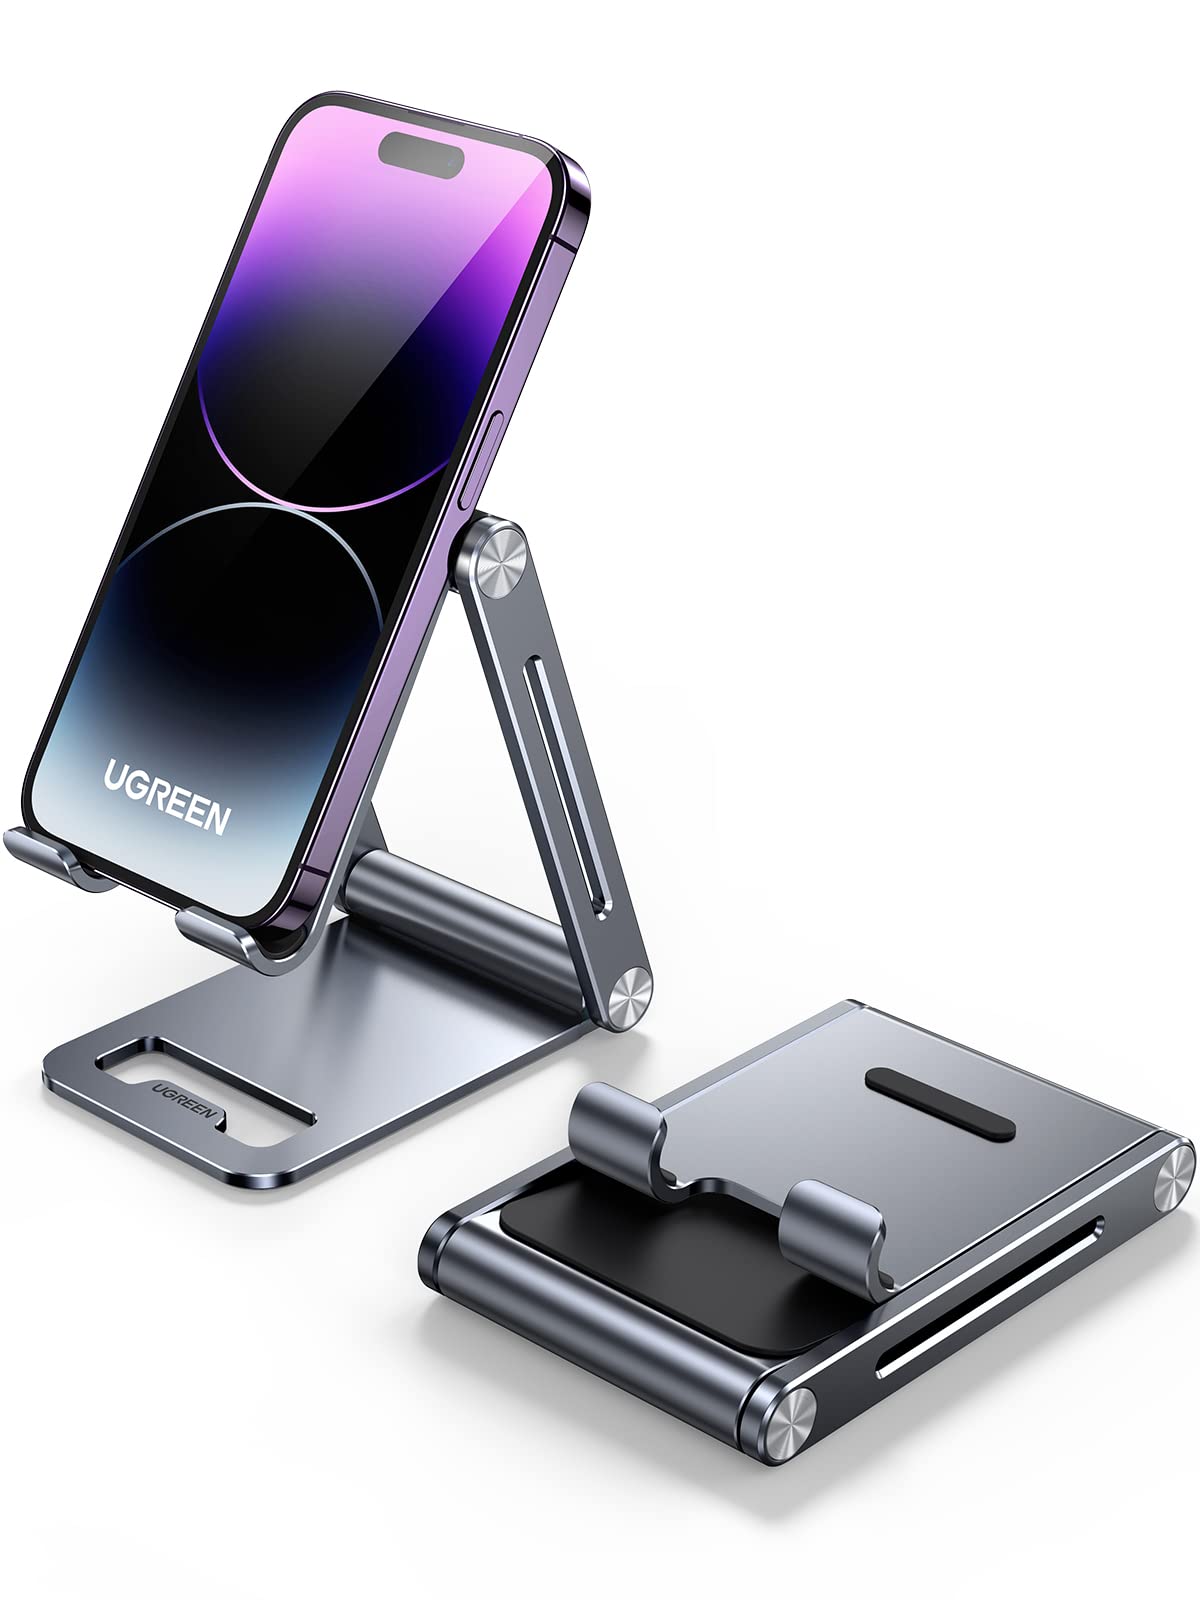 UGREEN Cell Phone Stand for Desk, Foldable Adjustable Aluminum Phone Stand Desktop Compatible for iPhone 15 14 13 12 Pro Max, iPhone 11 X SE XS XR 8 Plus, Galaxy Note20 S20 S10 and More Devices, Grey